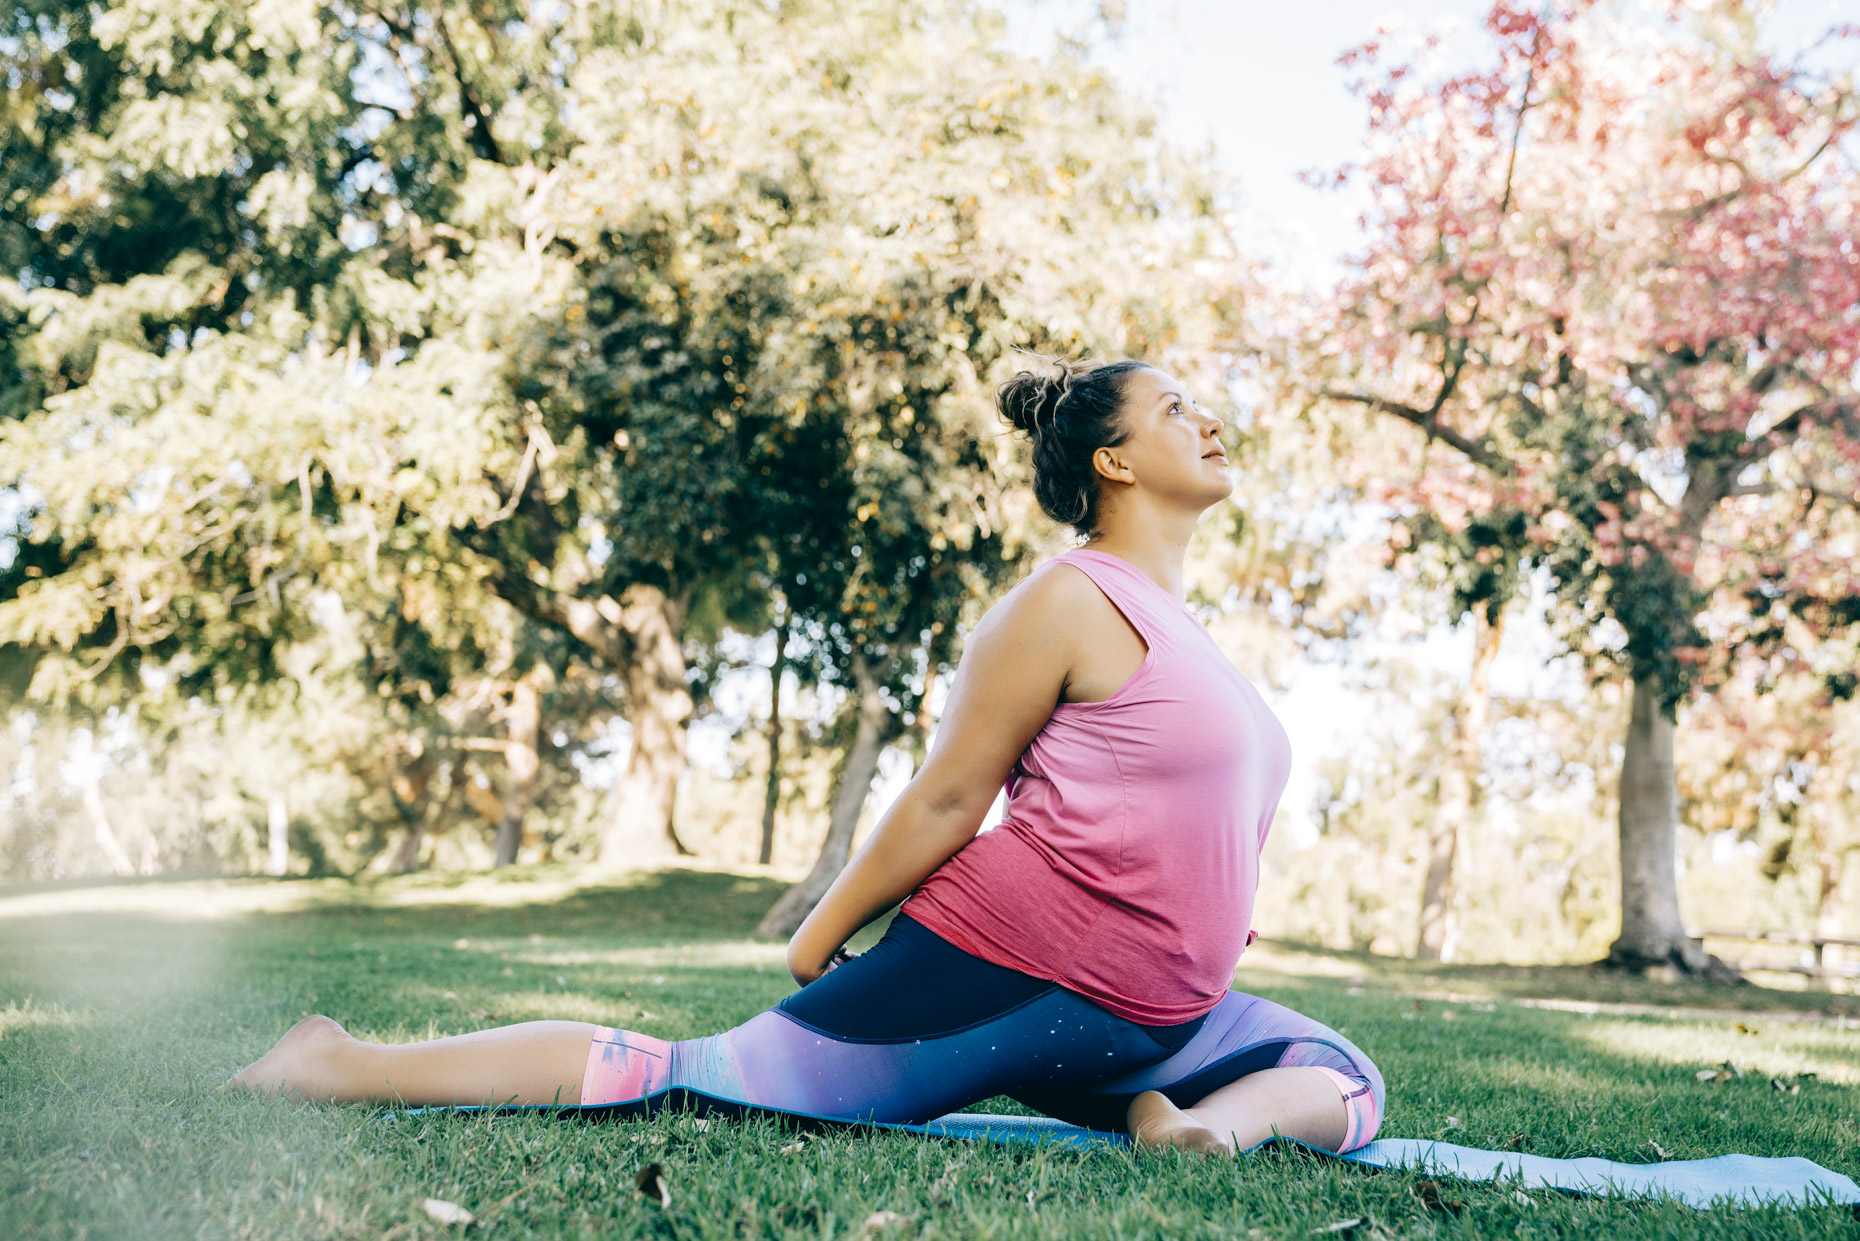 Plus-sized woman doing yoga outside in park